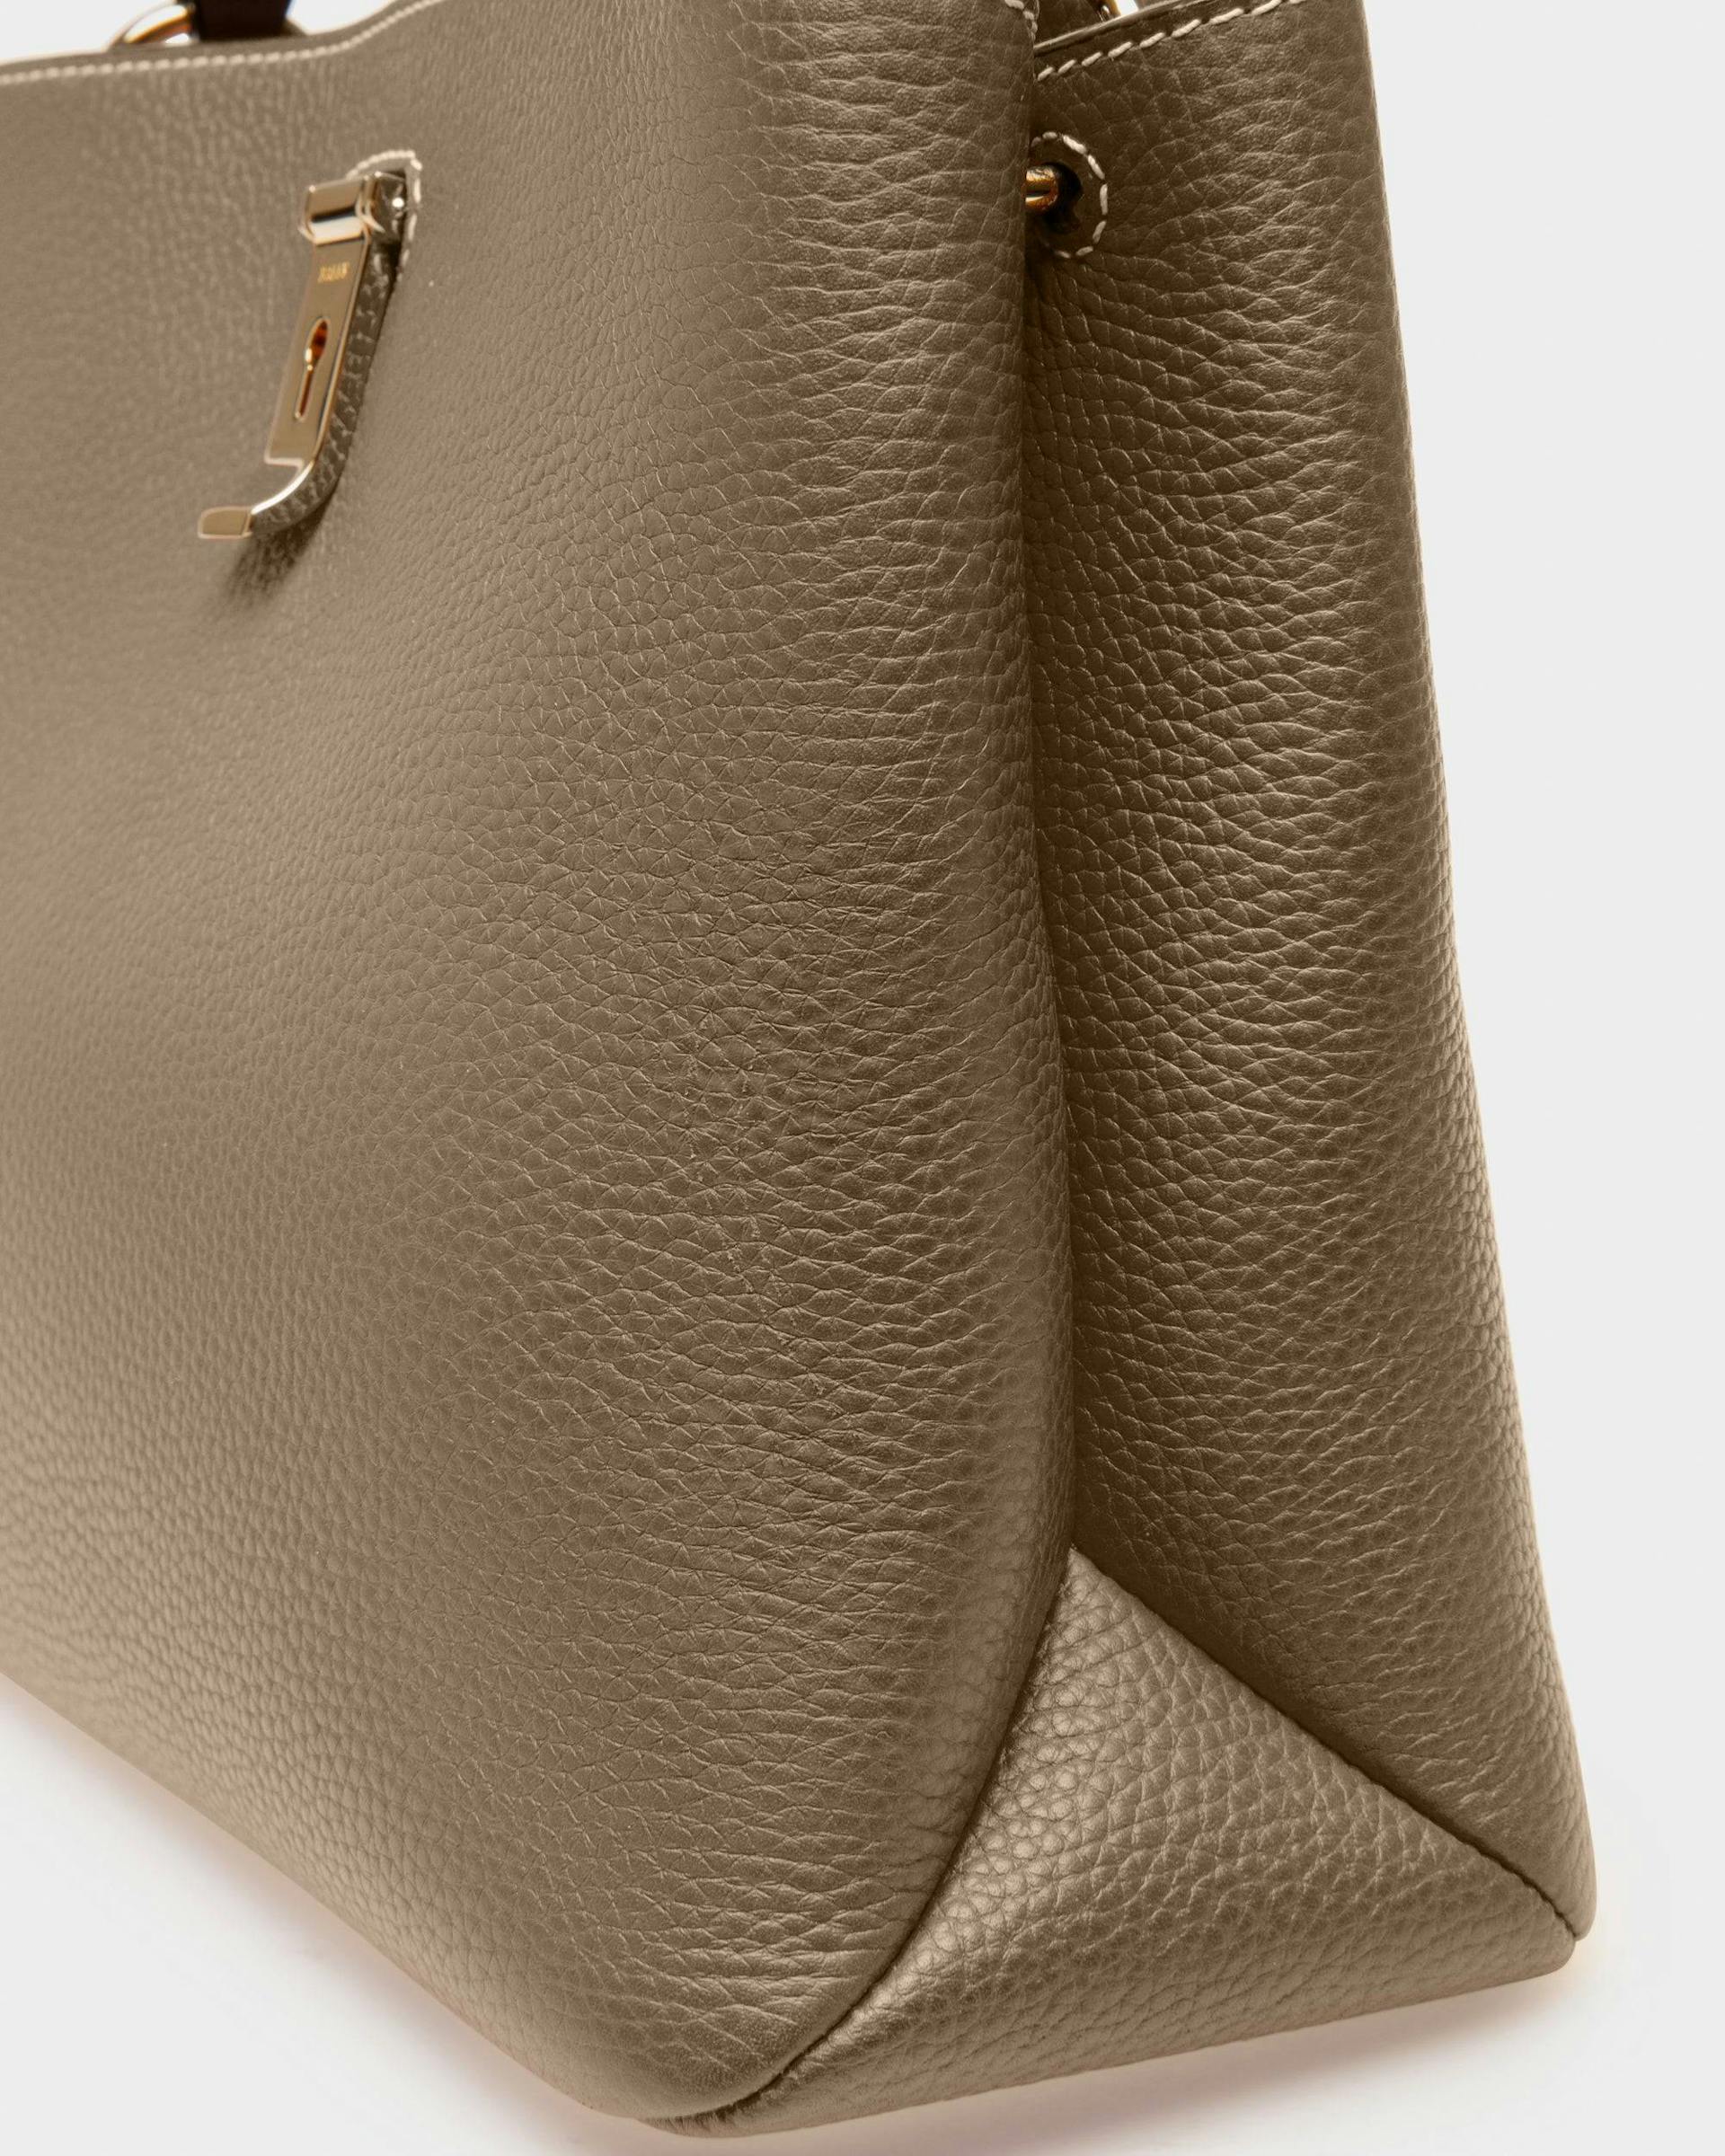 Lucyle Leather Shoulder Bag In Taupe - Women's - Bally - 04